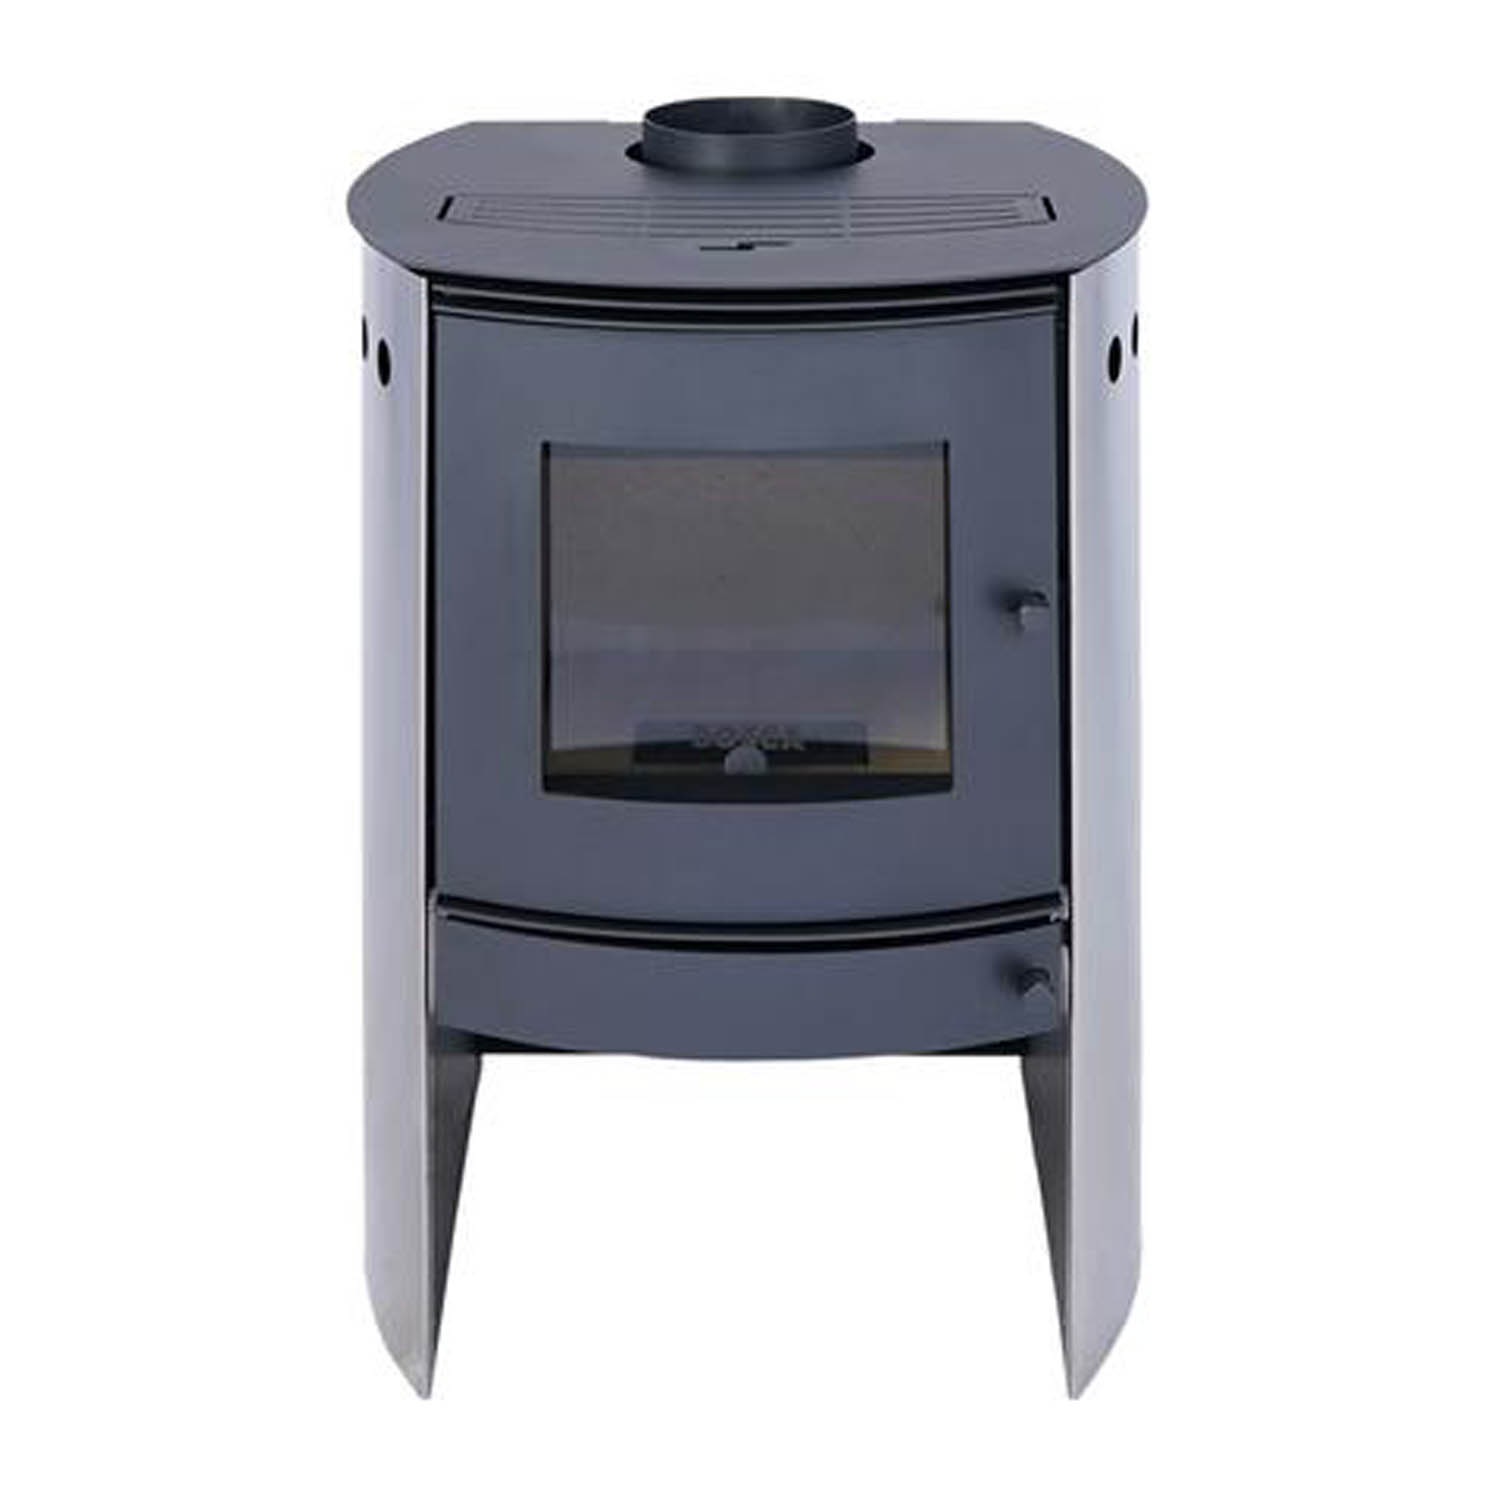 Bosca Spirit 380 Stainless Steel Closed Combustion Fireplace